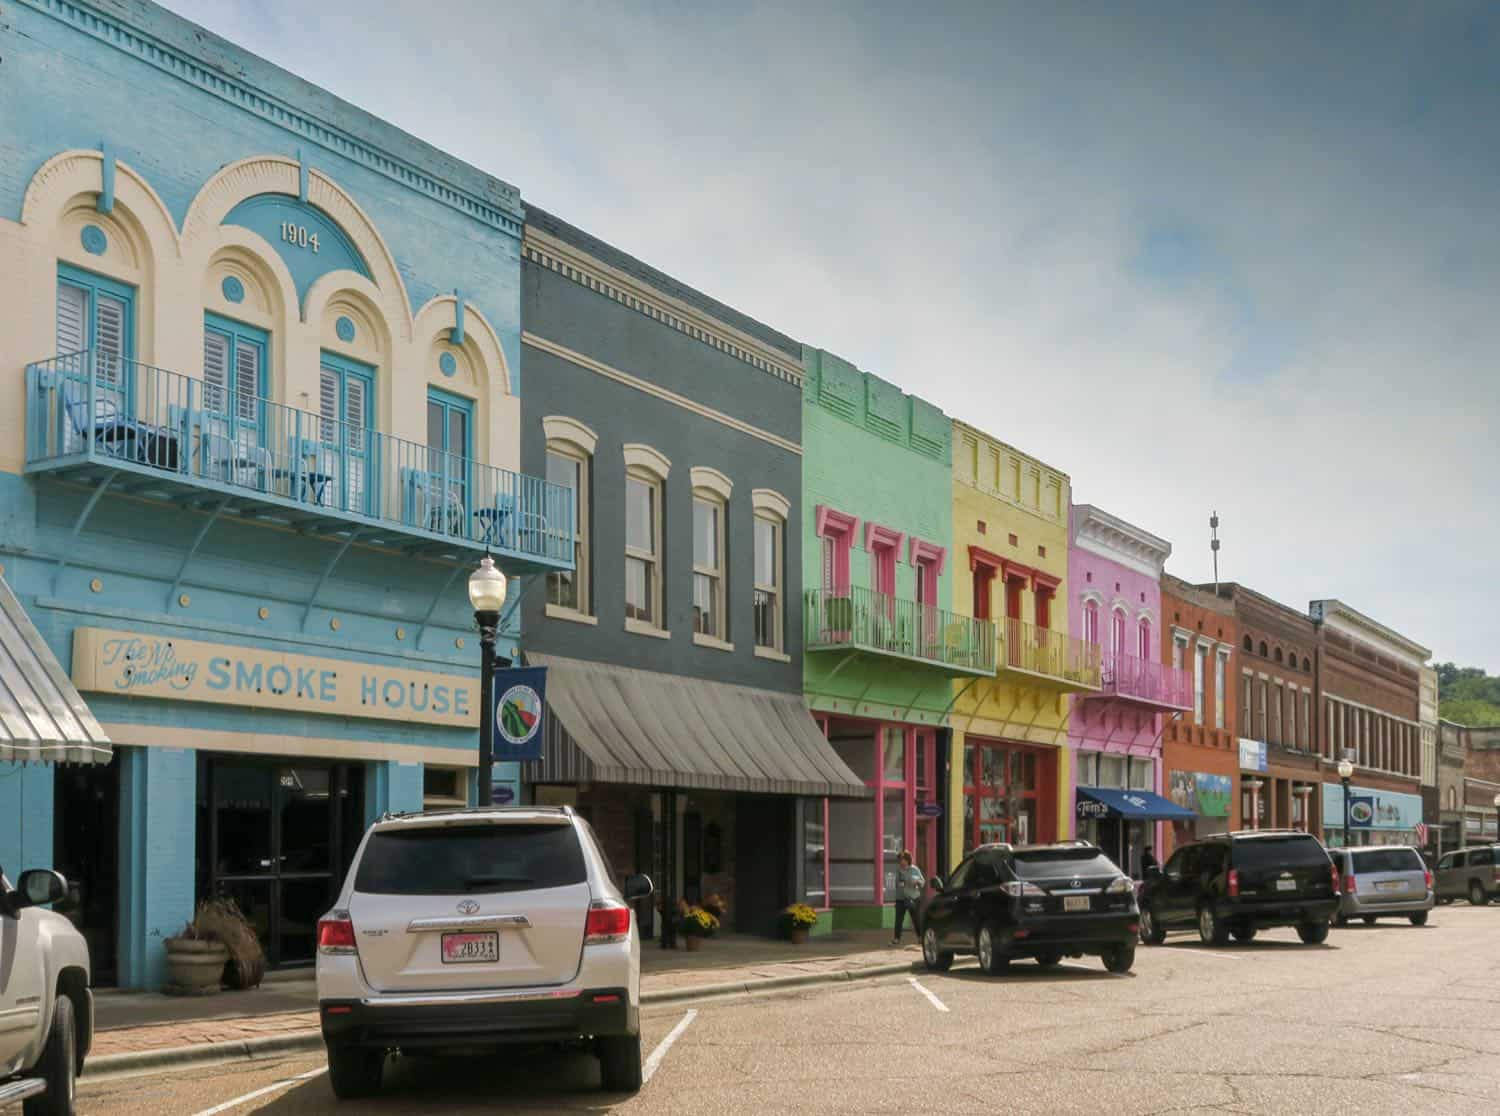 Yazoo City street lined with colorful buildings in turquoise, green, yellow and pink.